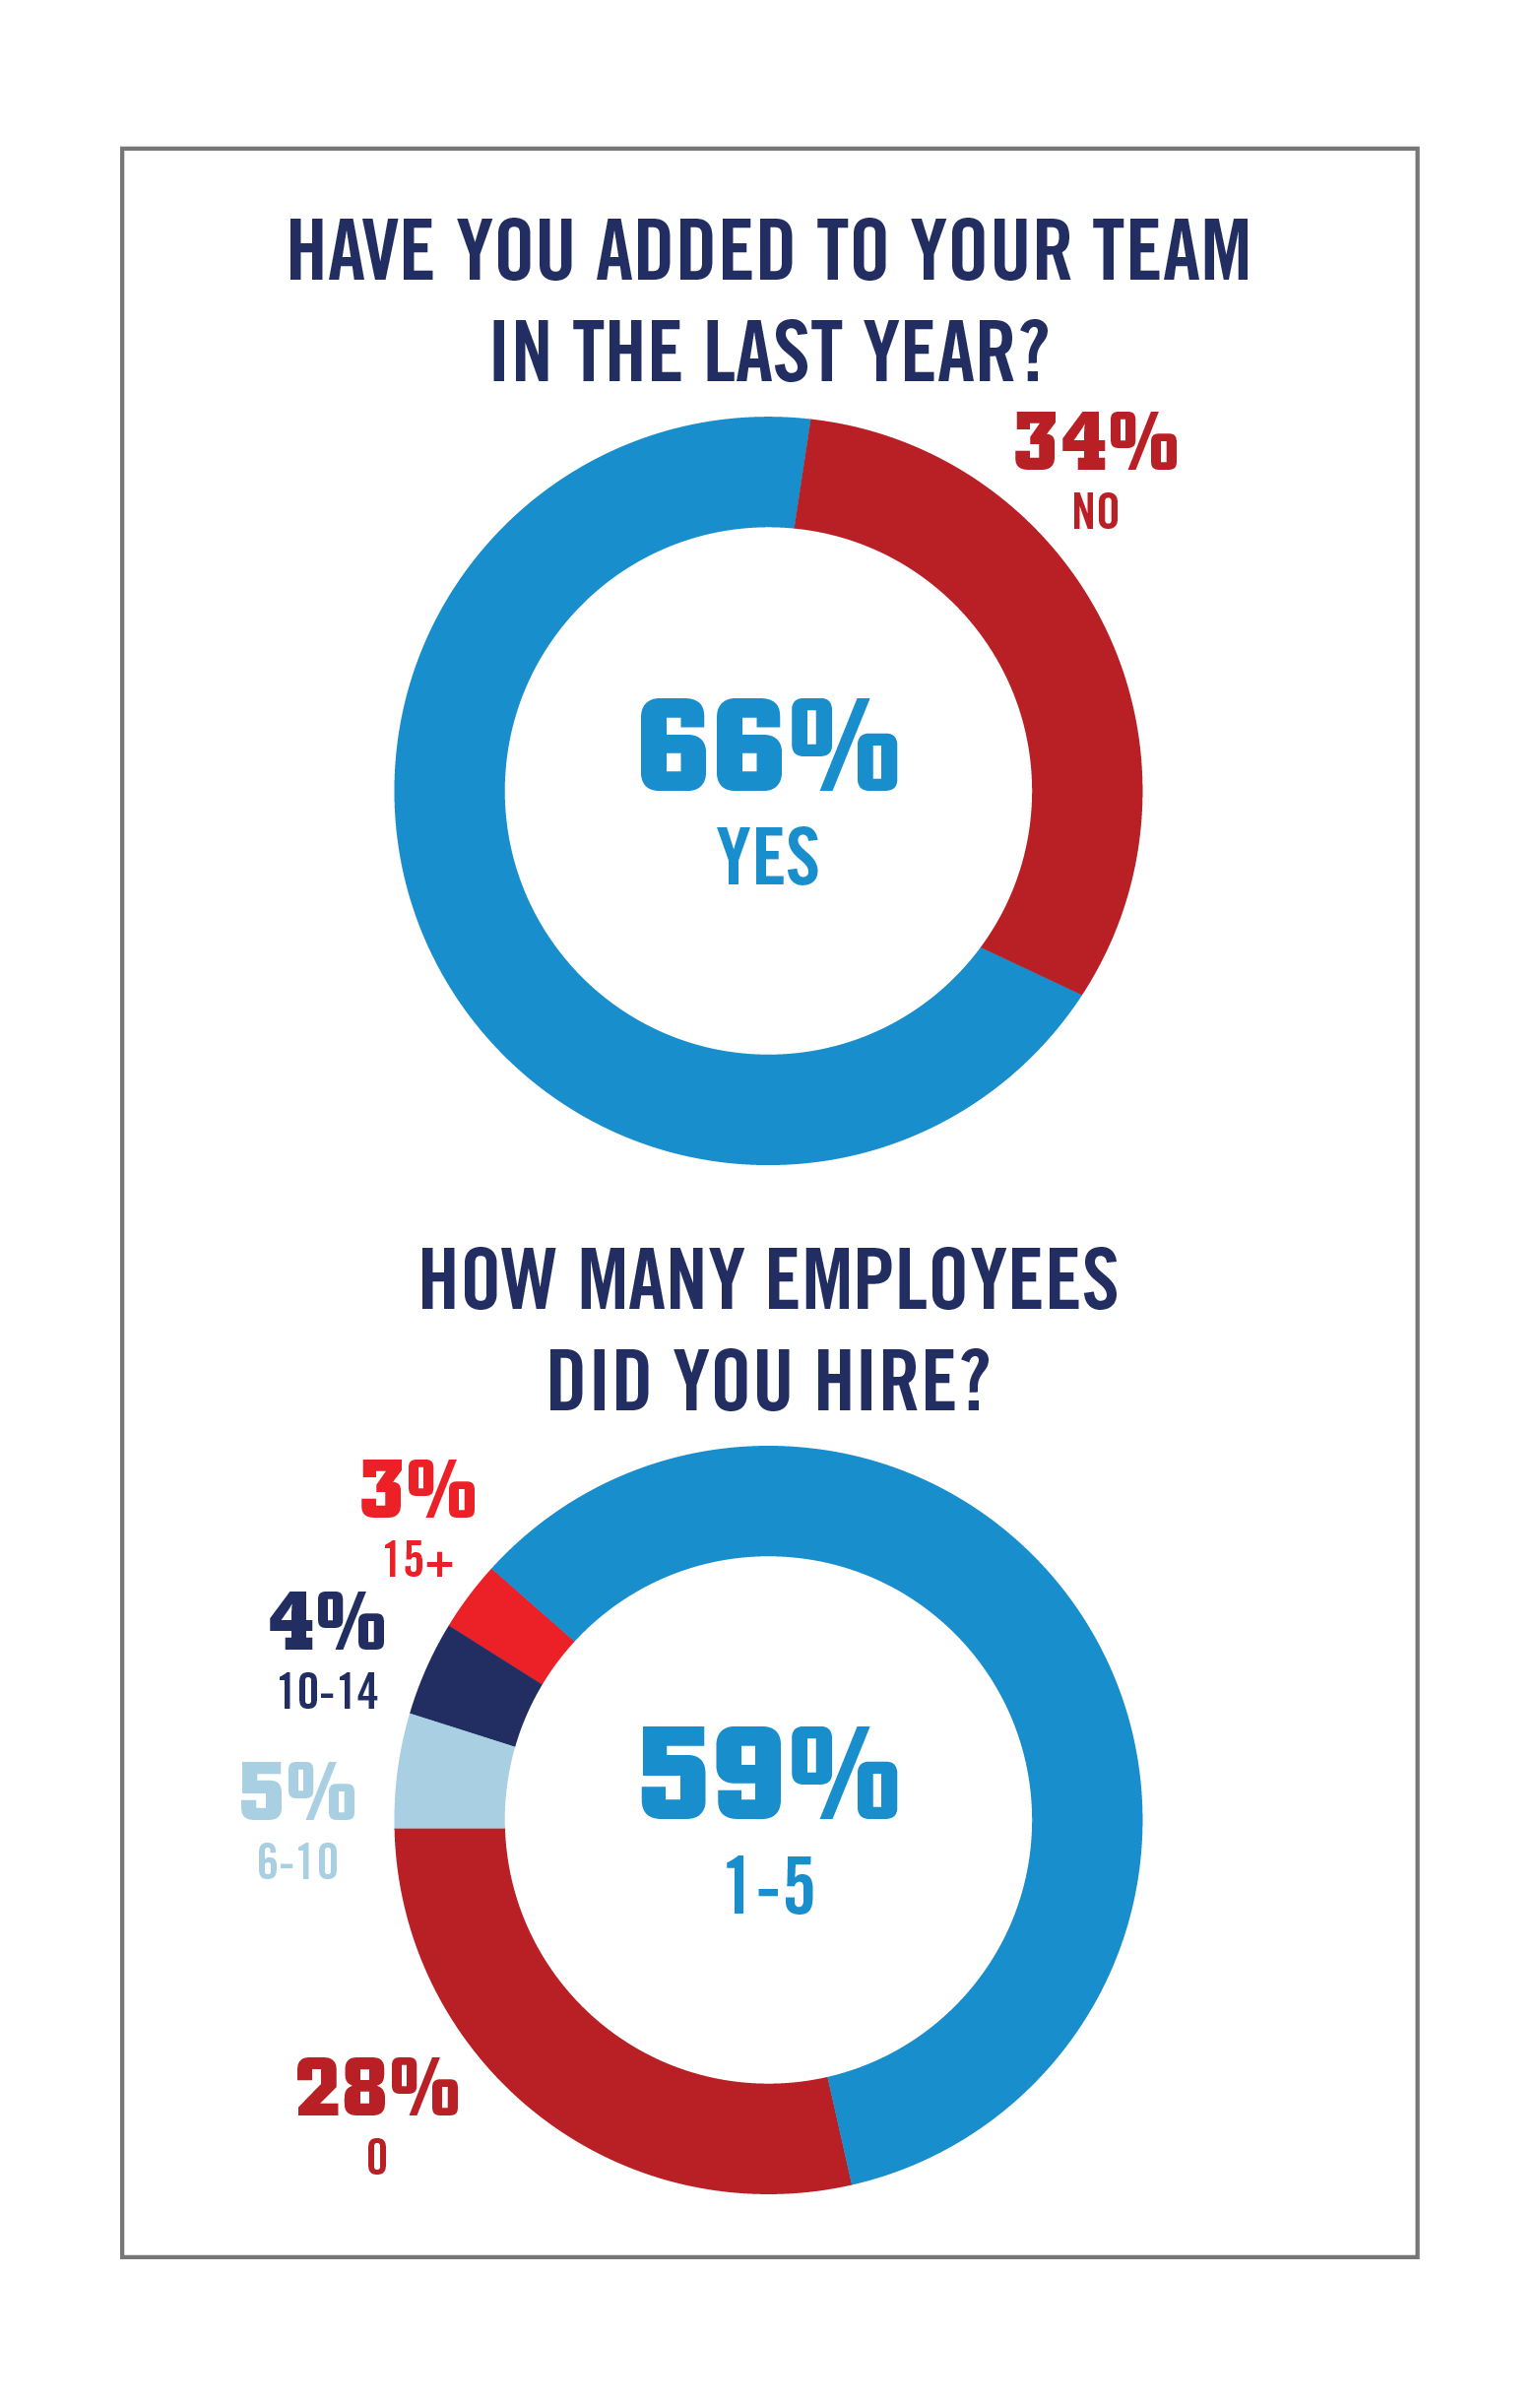 Rate of new employee growth in pool industry